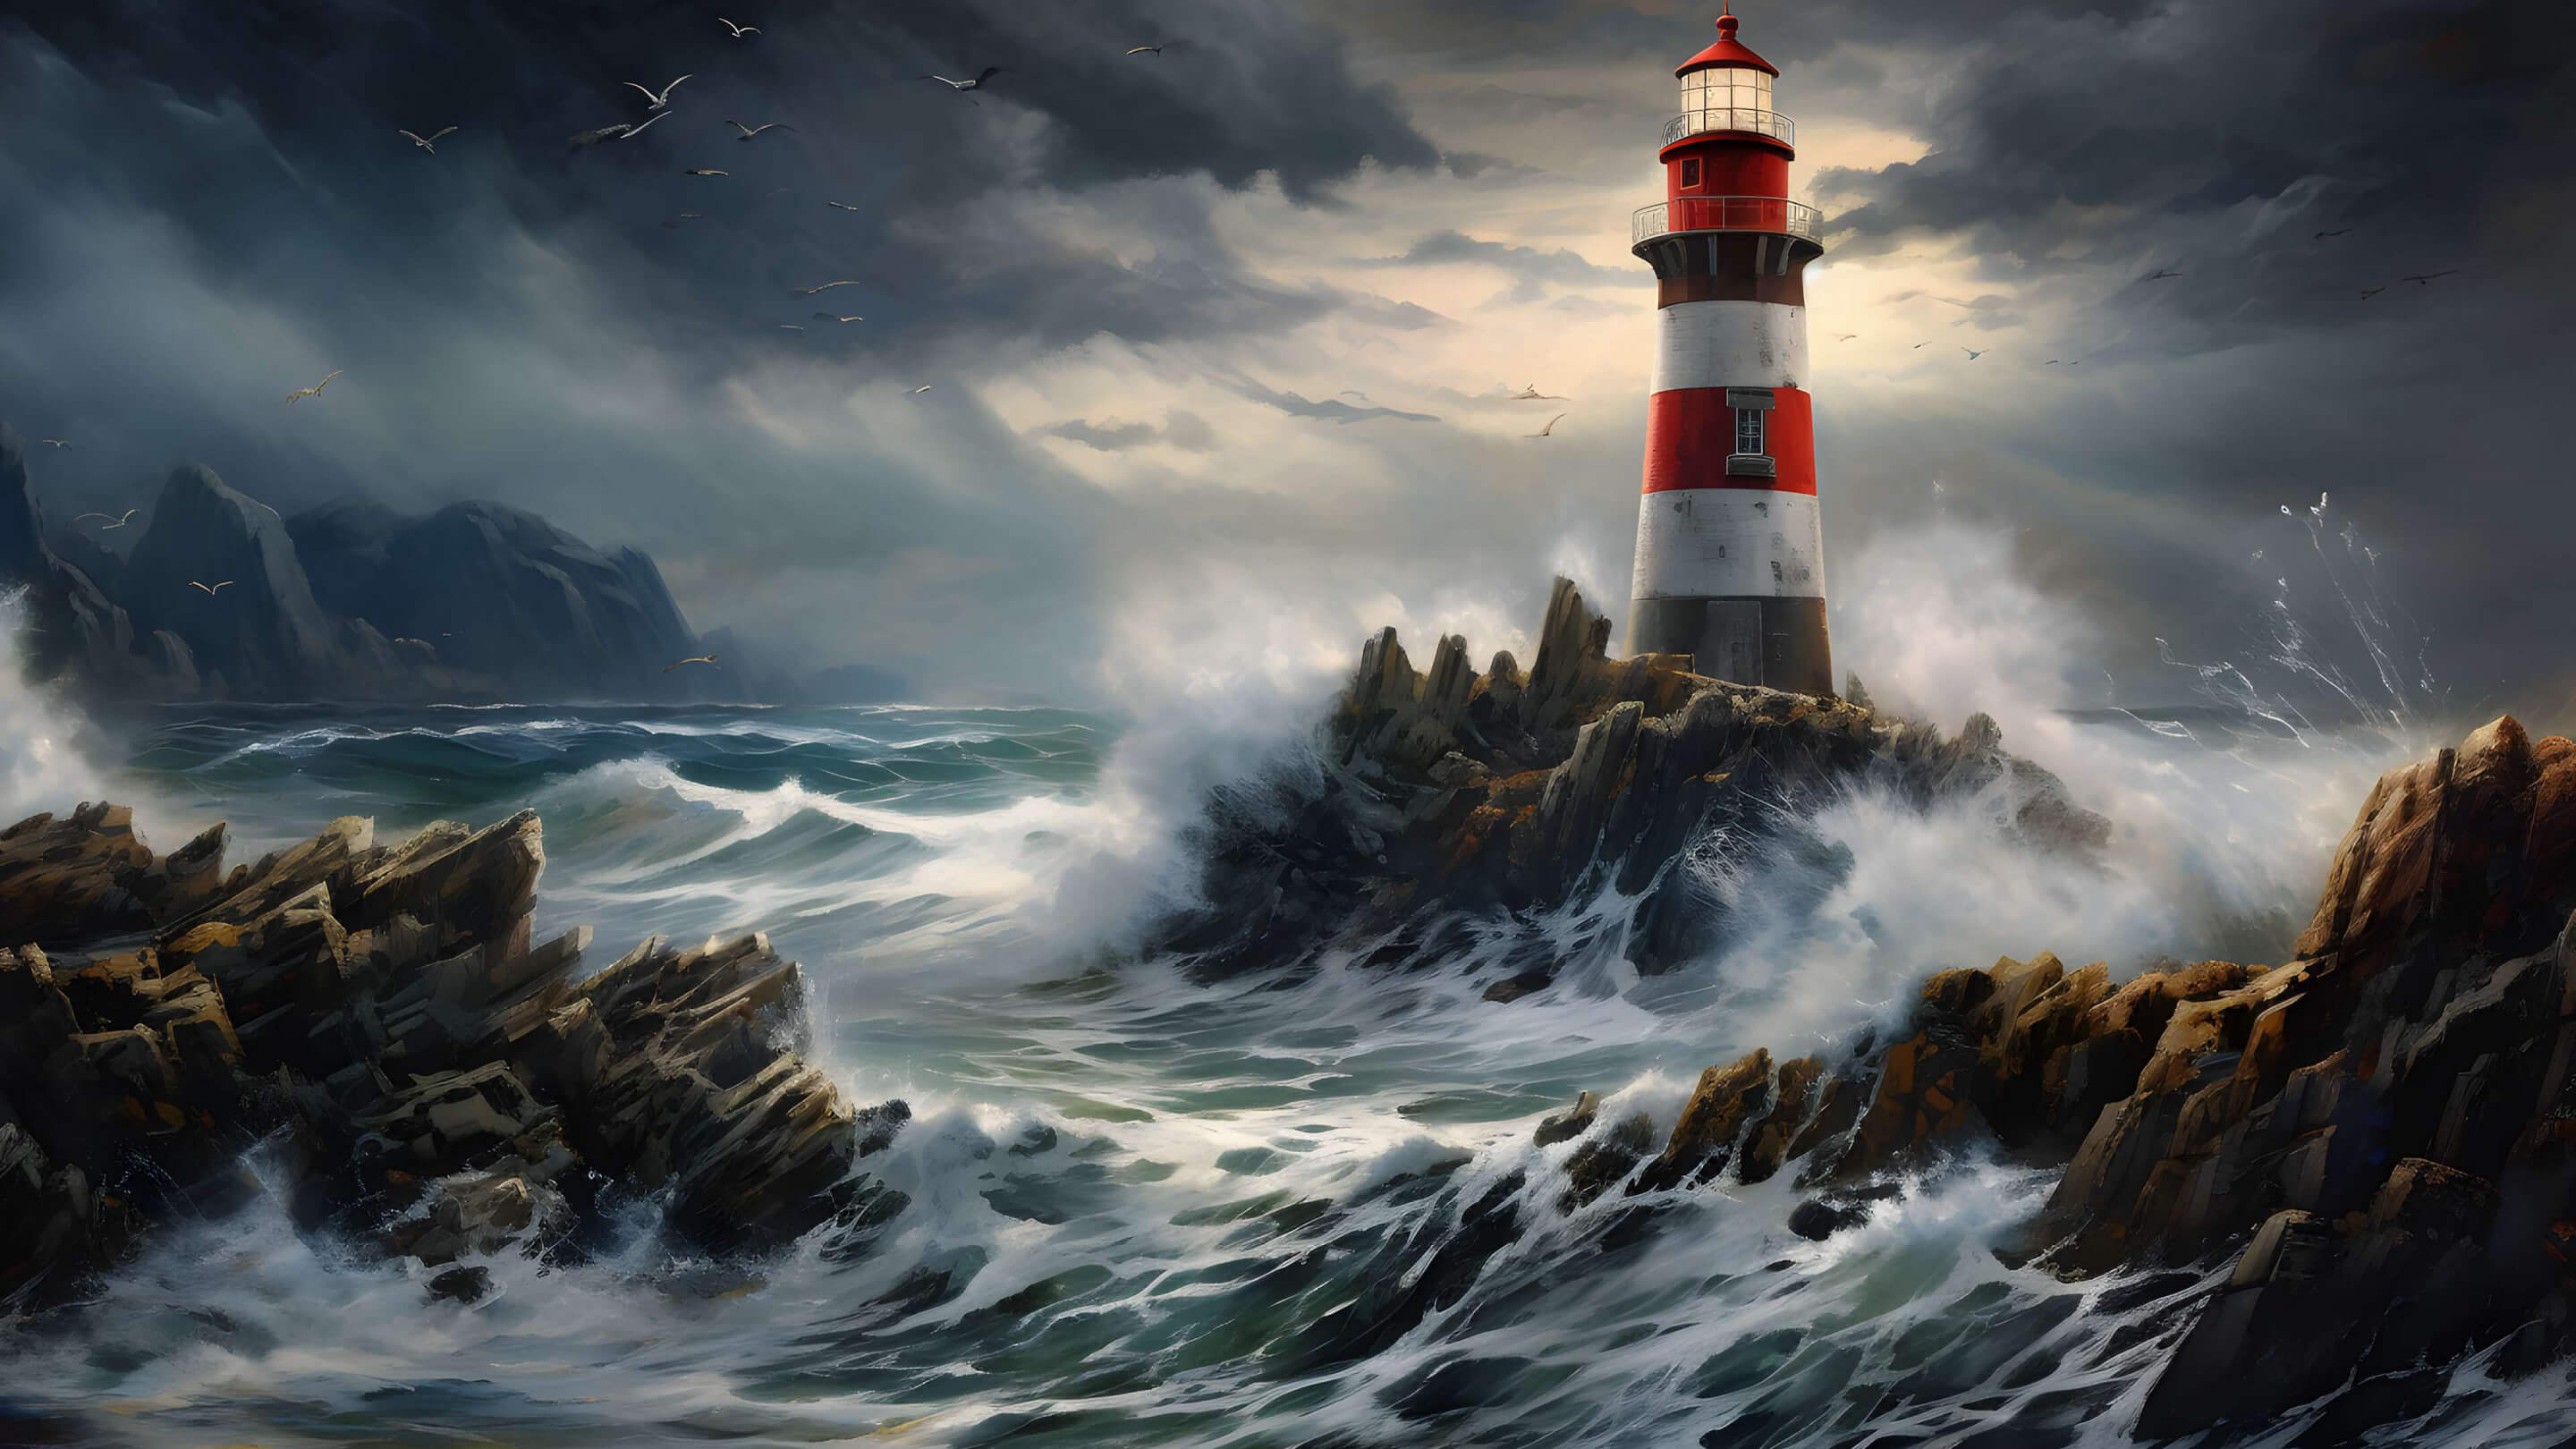 Lighthouse in the ocean waves wallpaper 2880x1620